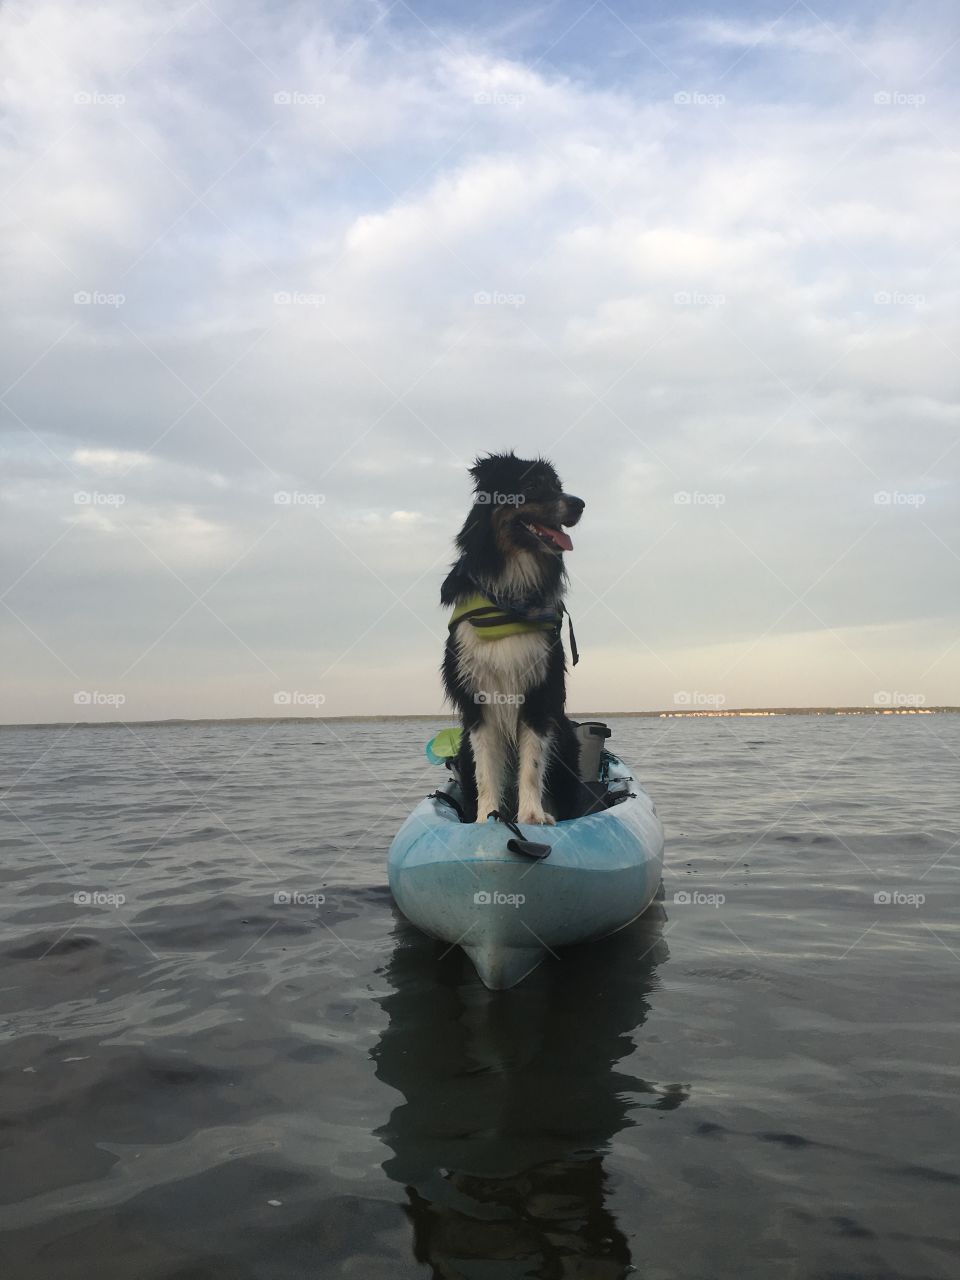 Kayaking with the dog